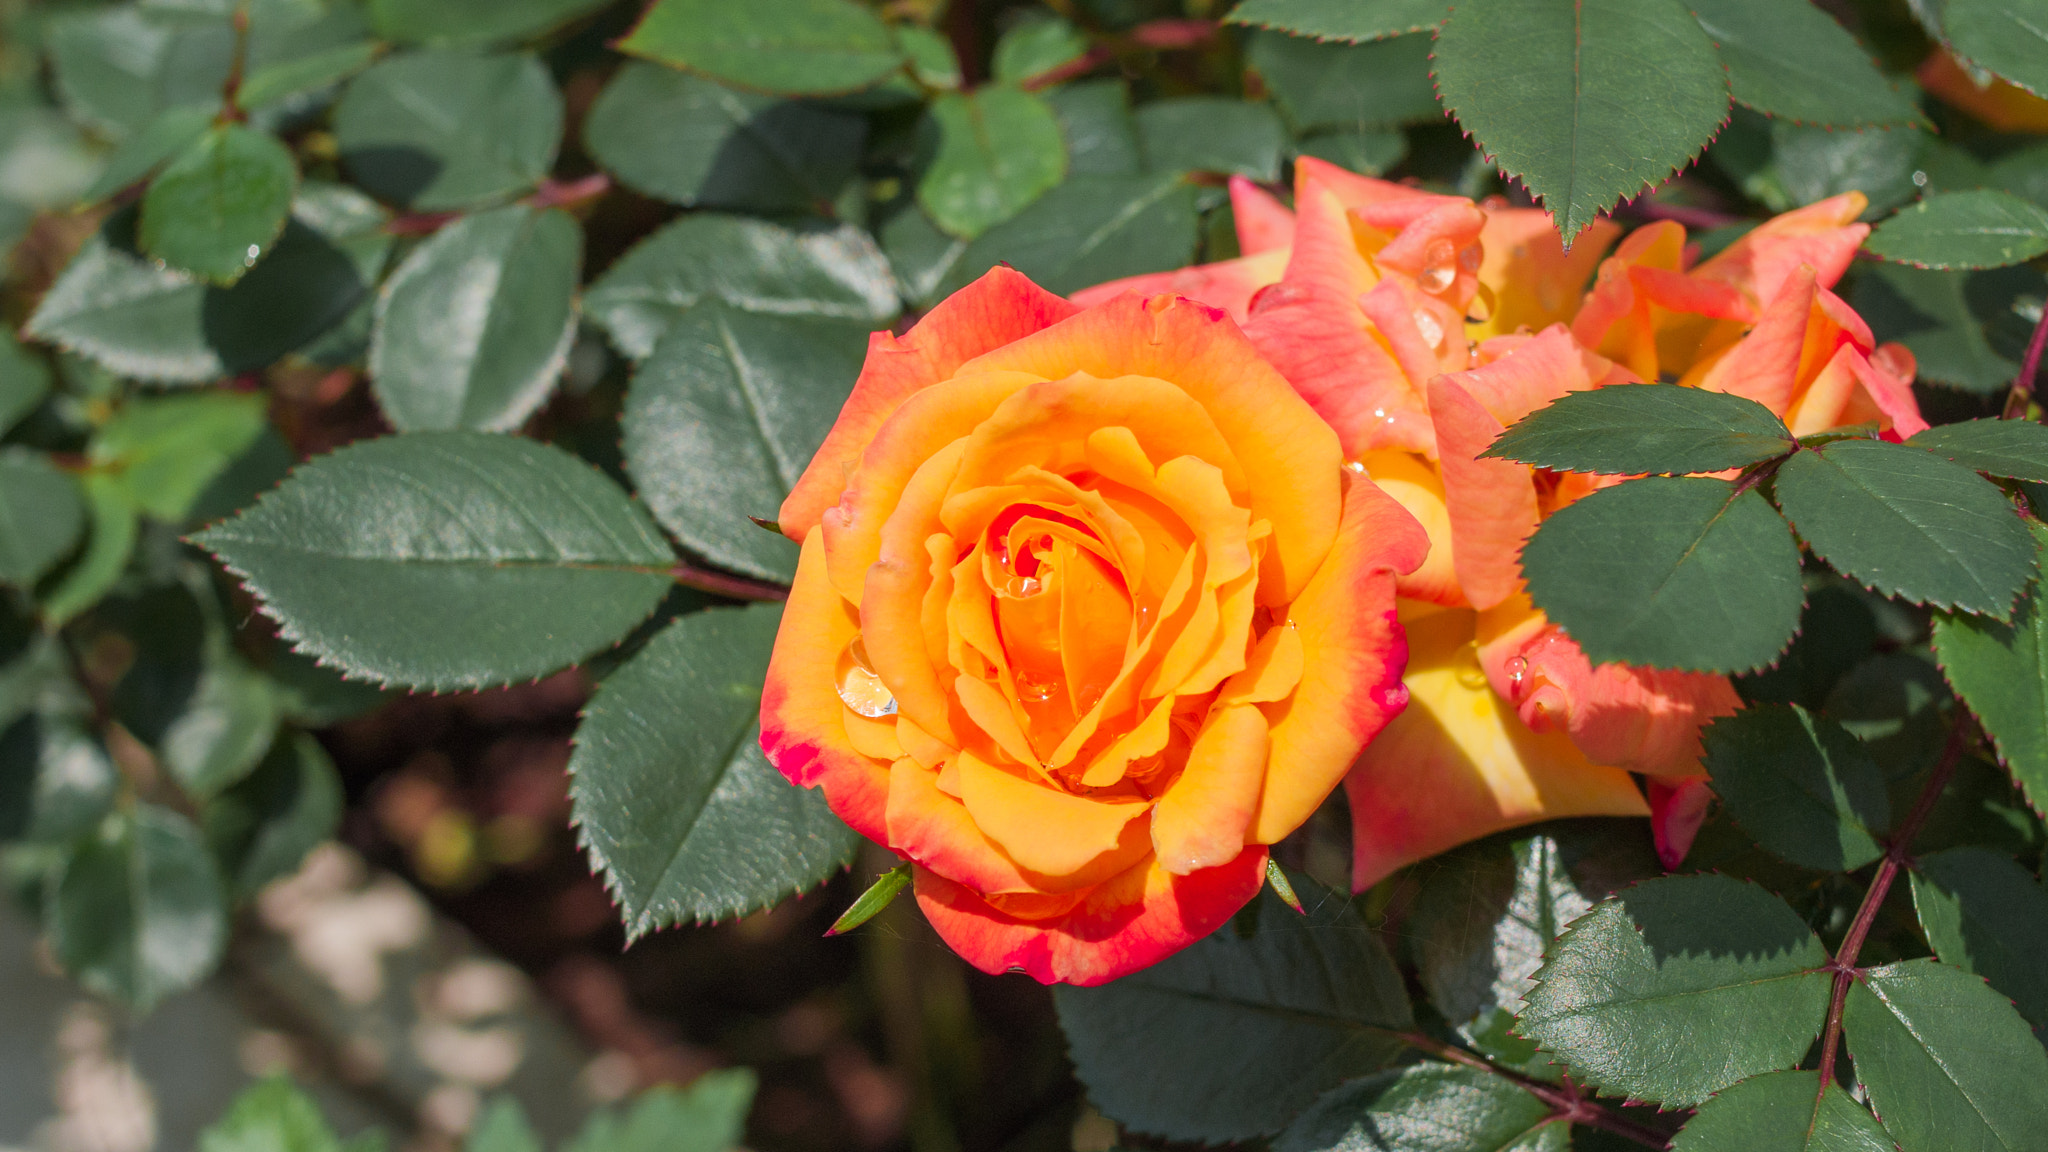 Pentax K200D sample photo. The rose which can change color photography